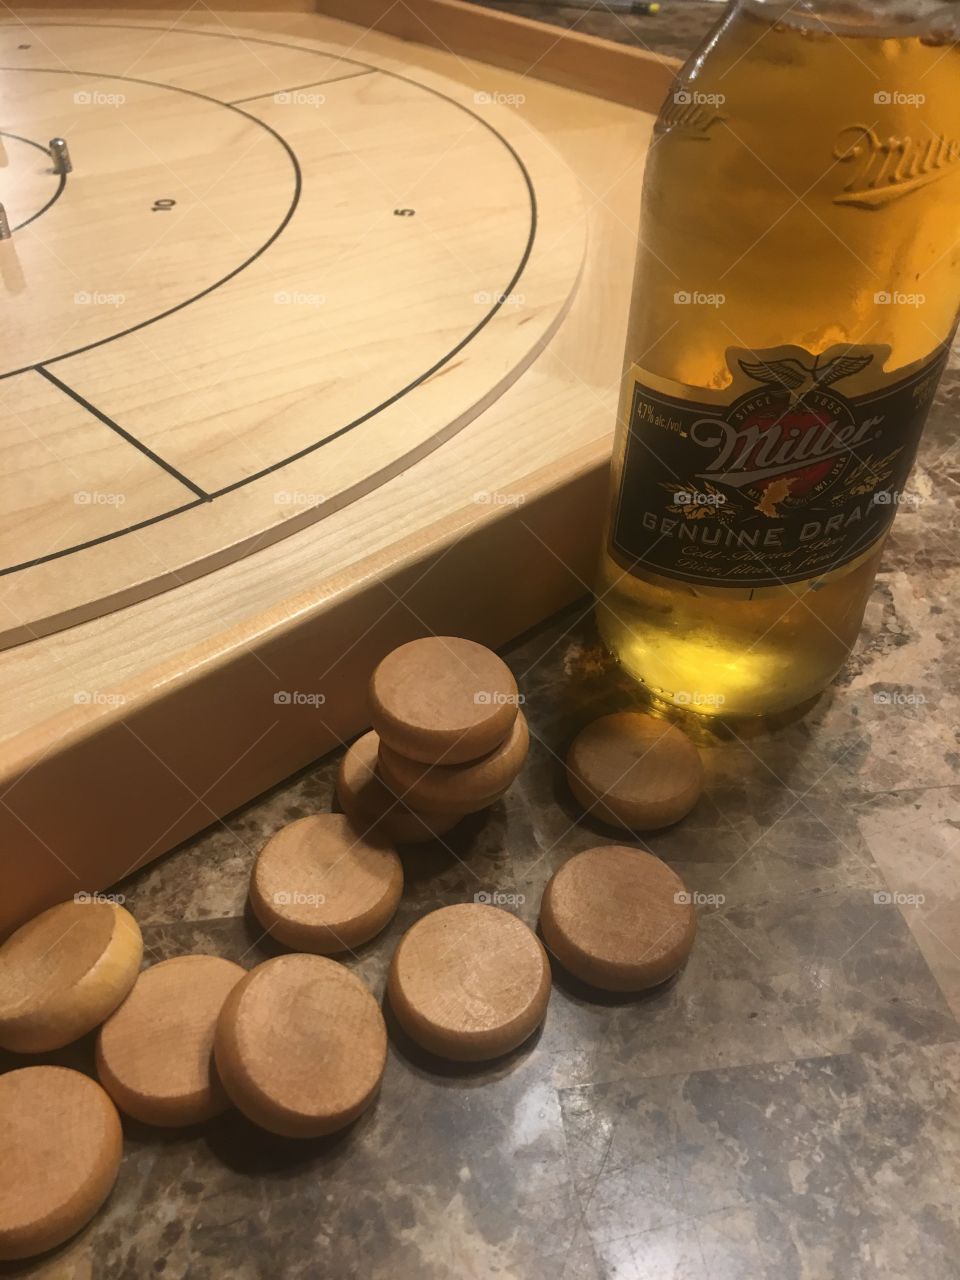 Games and beer night